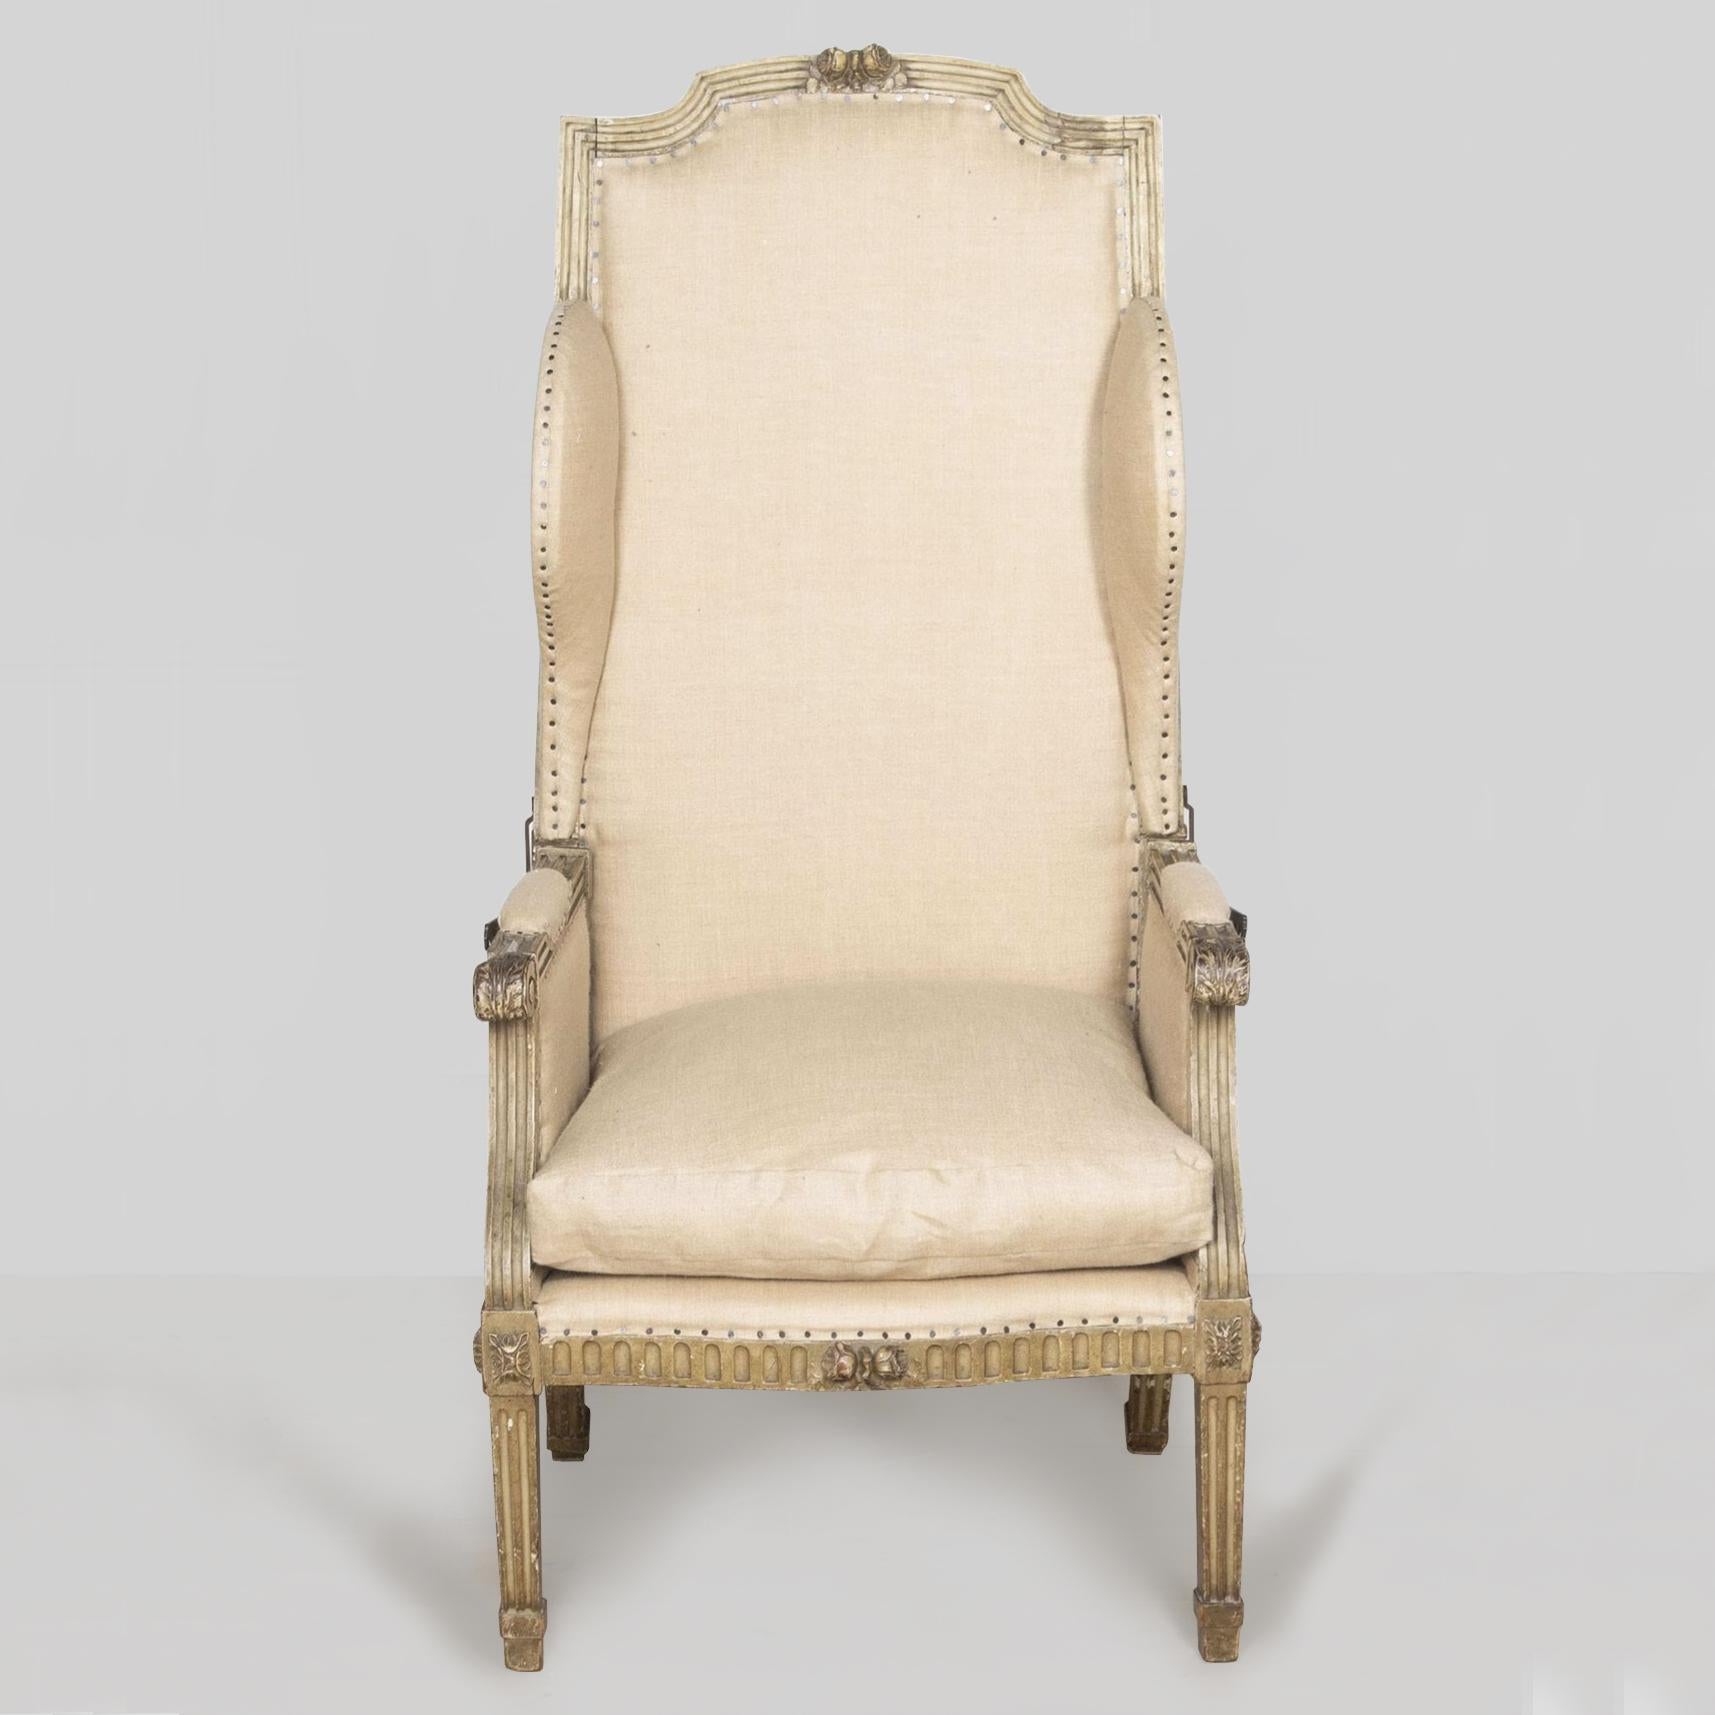 18th century highly unusual French Louis XVI painted reclining wing chair. 

The very high back with a carved and shaped top. 

The shallow wings on a channelled frame, the whole back reclining on steel ratchets.

The arms carved with acanthus